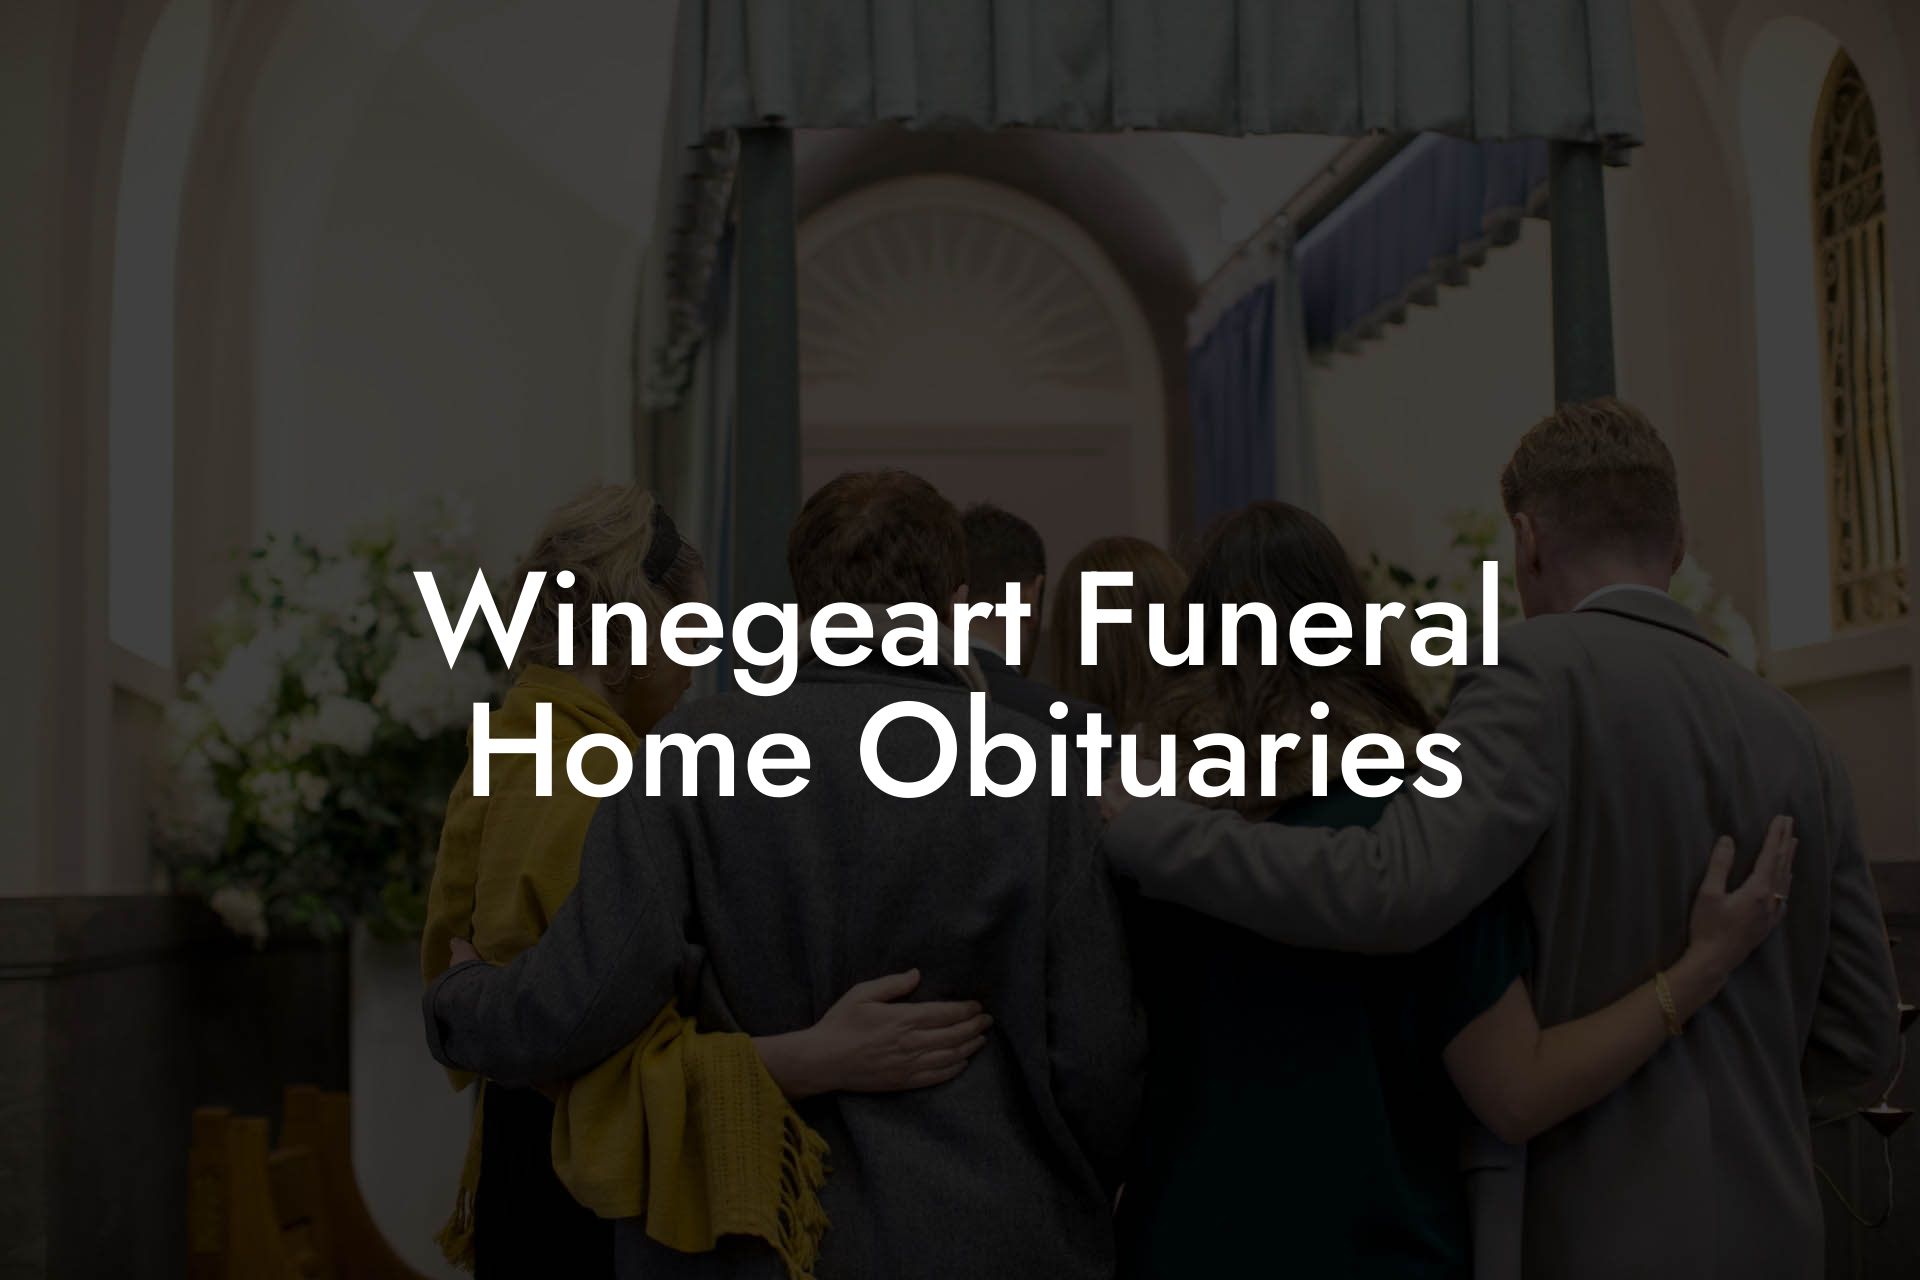 Winegeart Funeral Home Obituaries